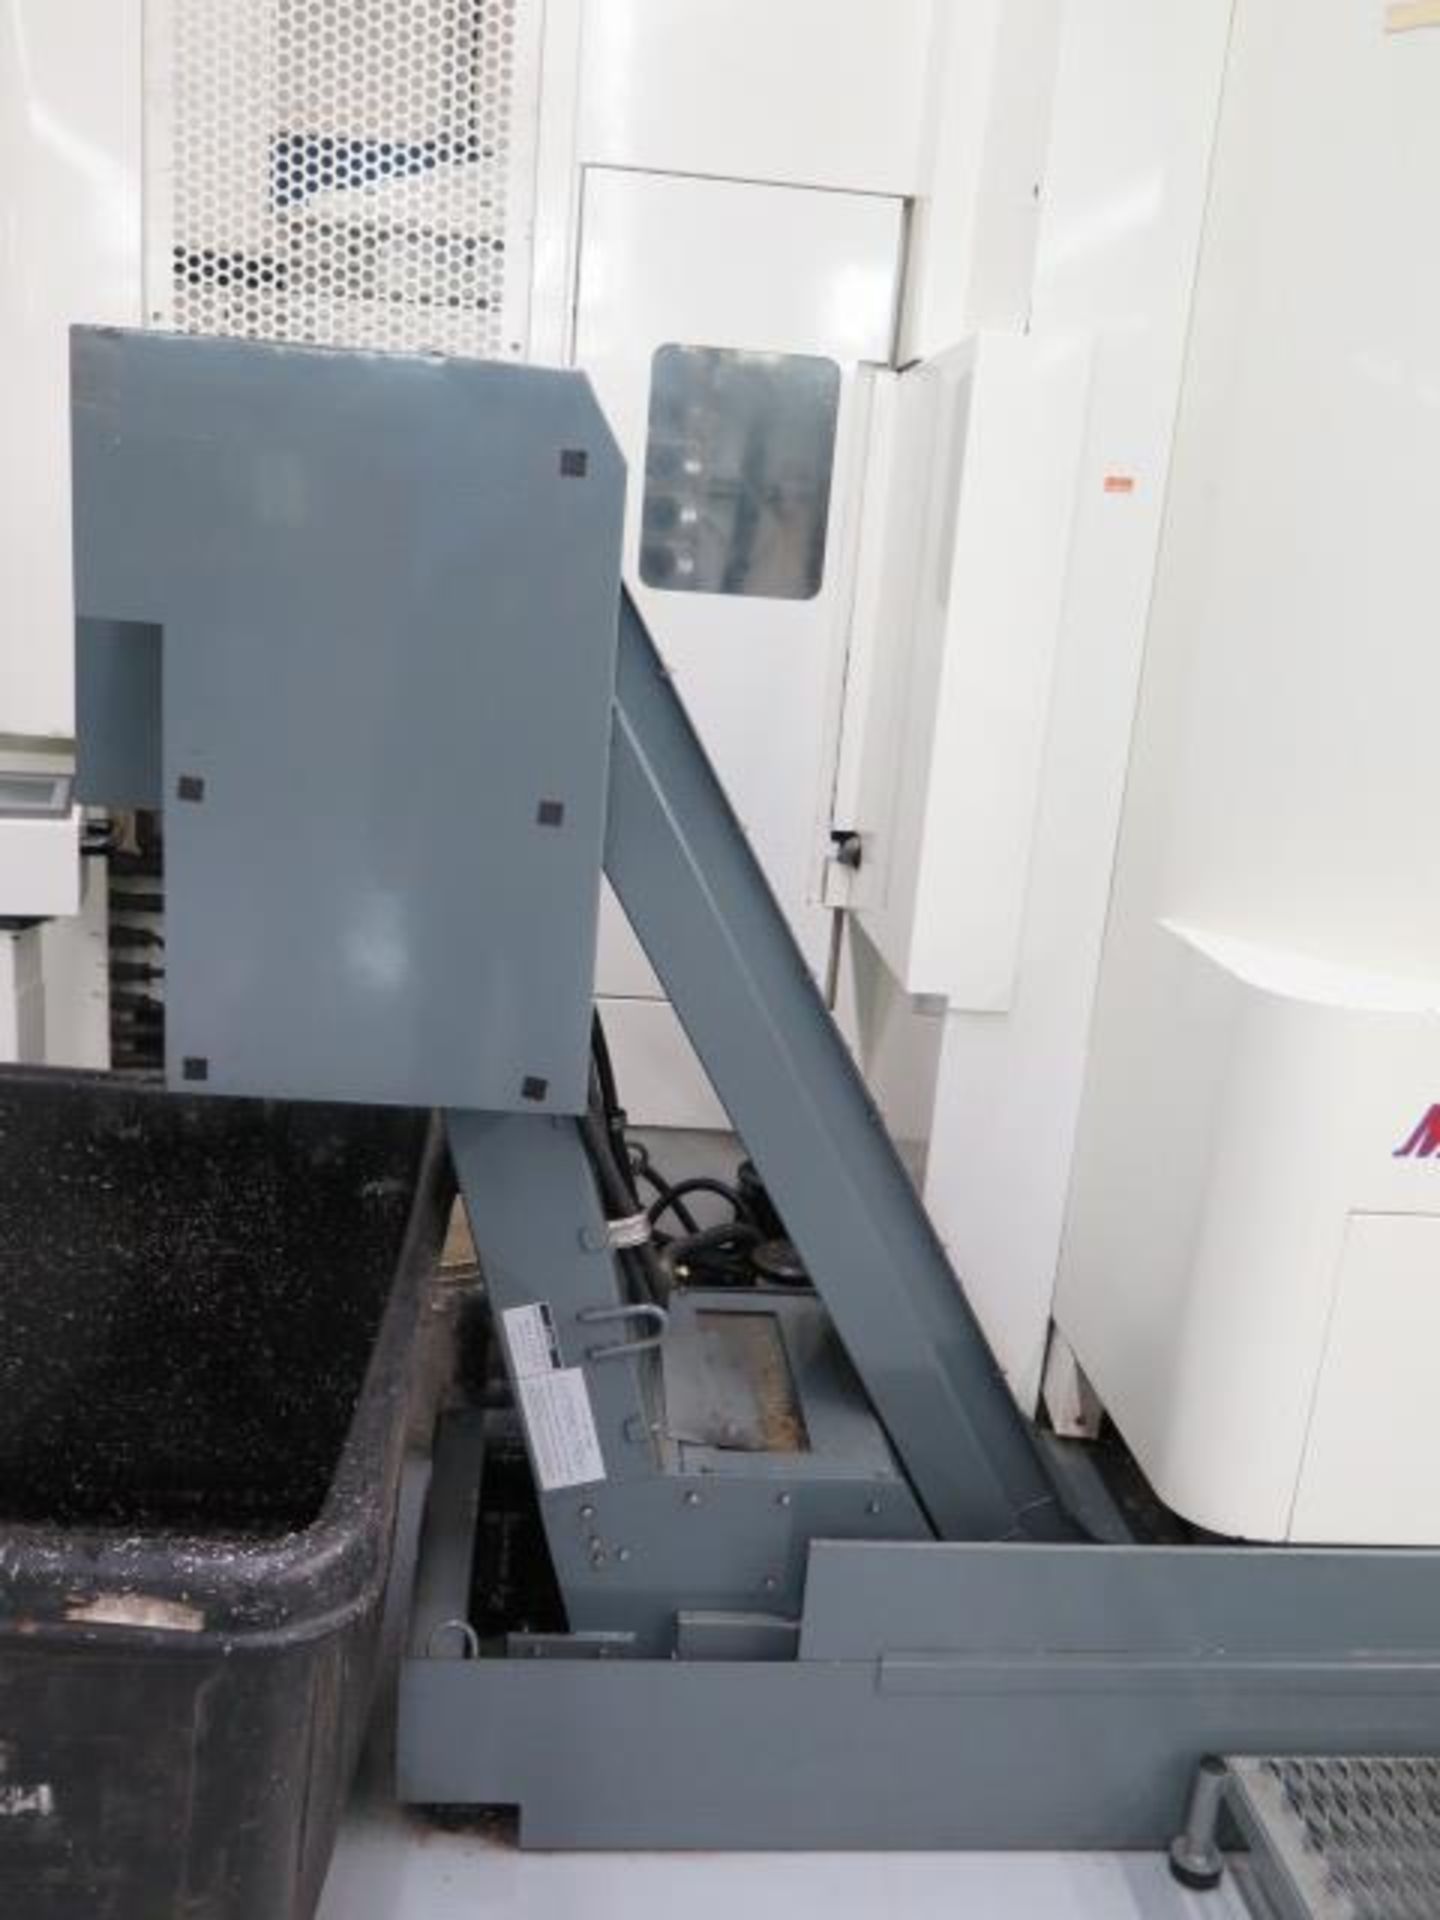 Kitamura Mycenter HX300iF 2-Paller 4-Axis CNC Horizontal Machining Center s/n 40975 SOLD AS IS - Image 19 of 26